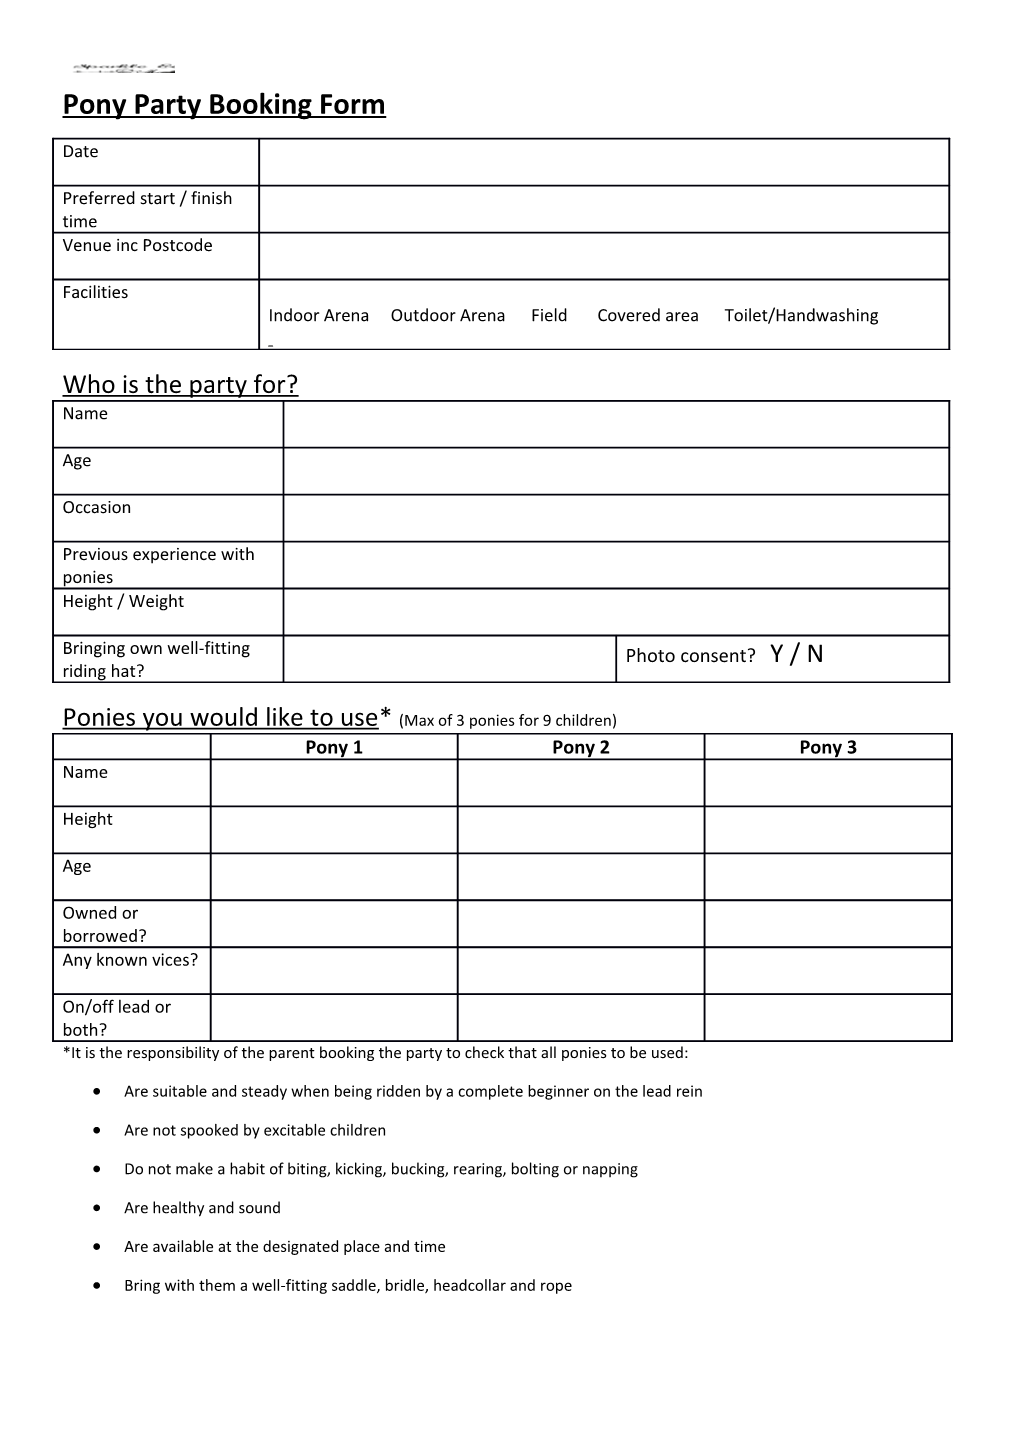 Pony Party Booking Form